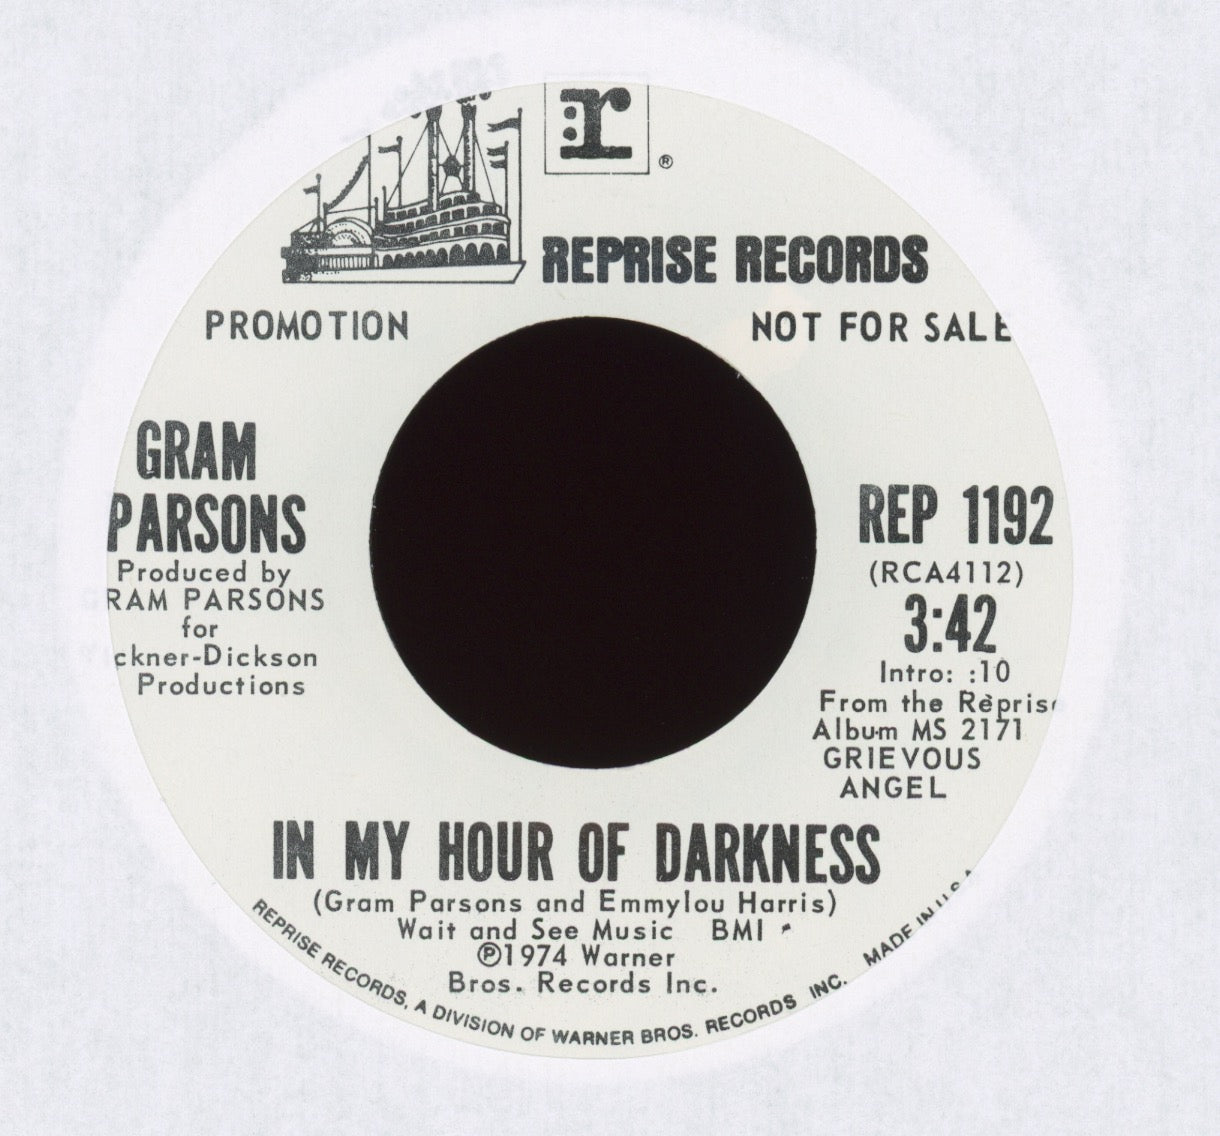 Gram Parsons - Love Hurts / In My Hour Of Darkness on Reprise Promo